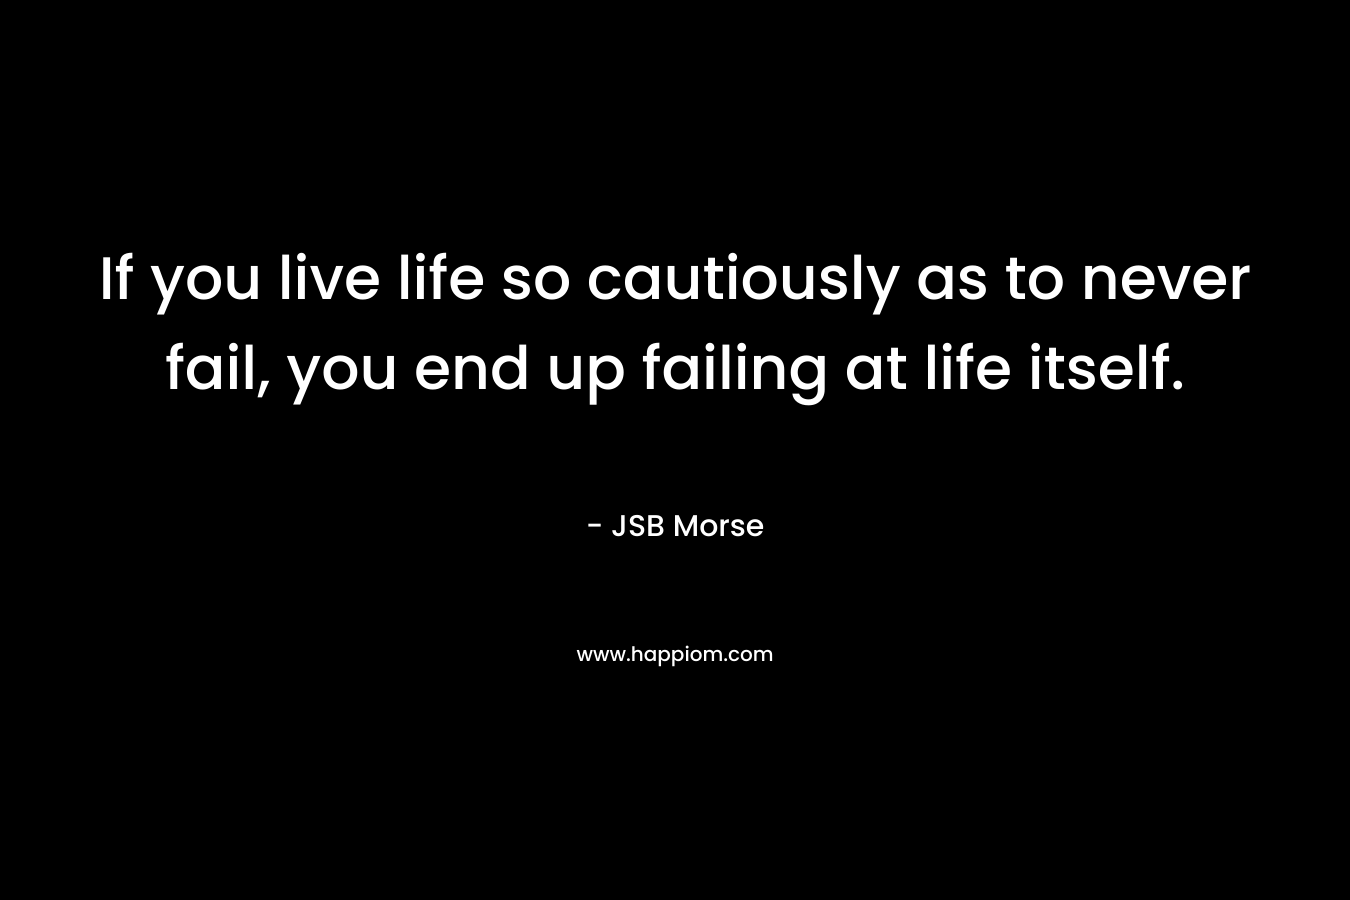 If you live life so cautiously as to never fail, you end up failing at life itself.